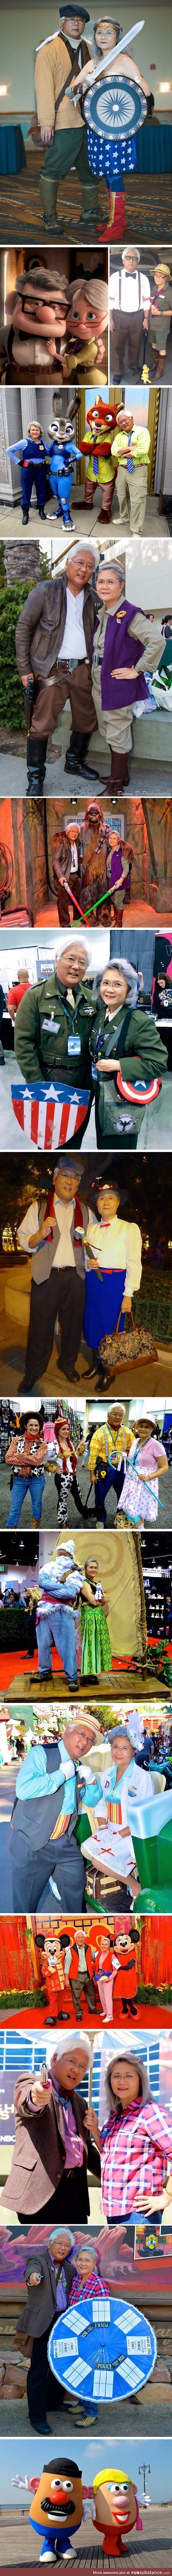 Retired couple that cosplay together